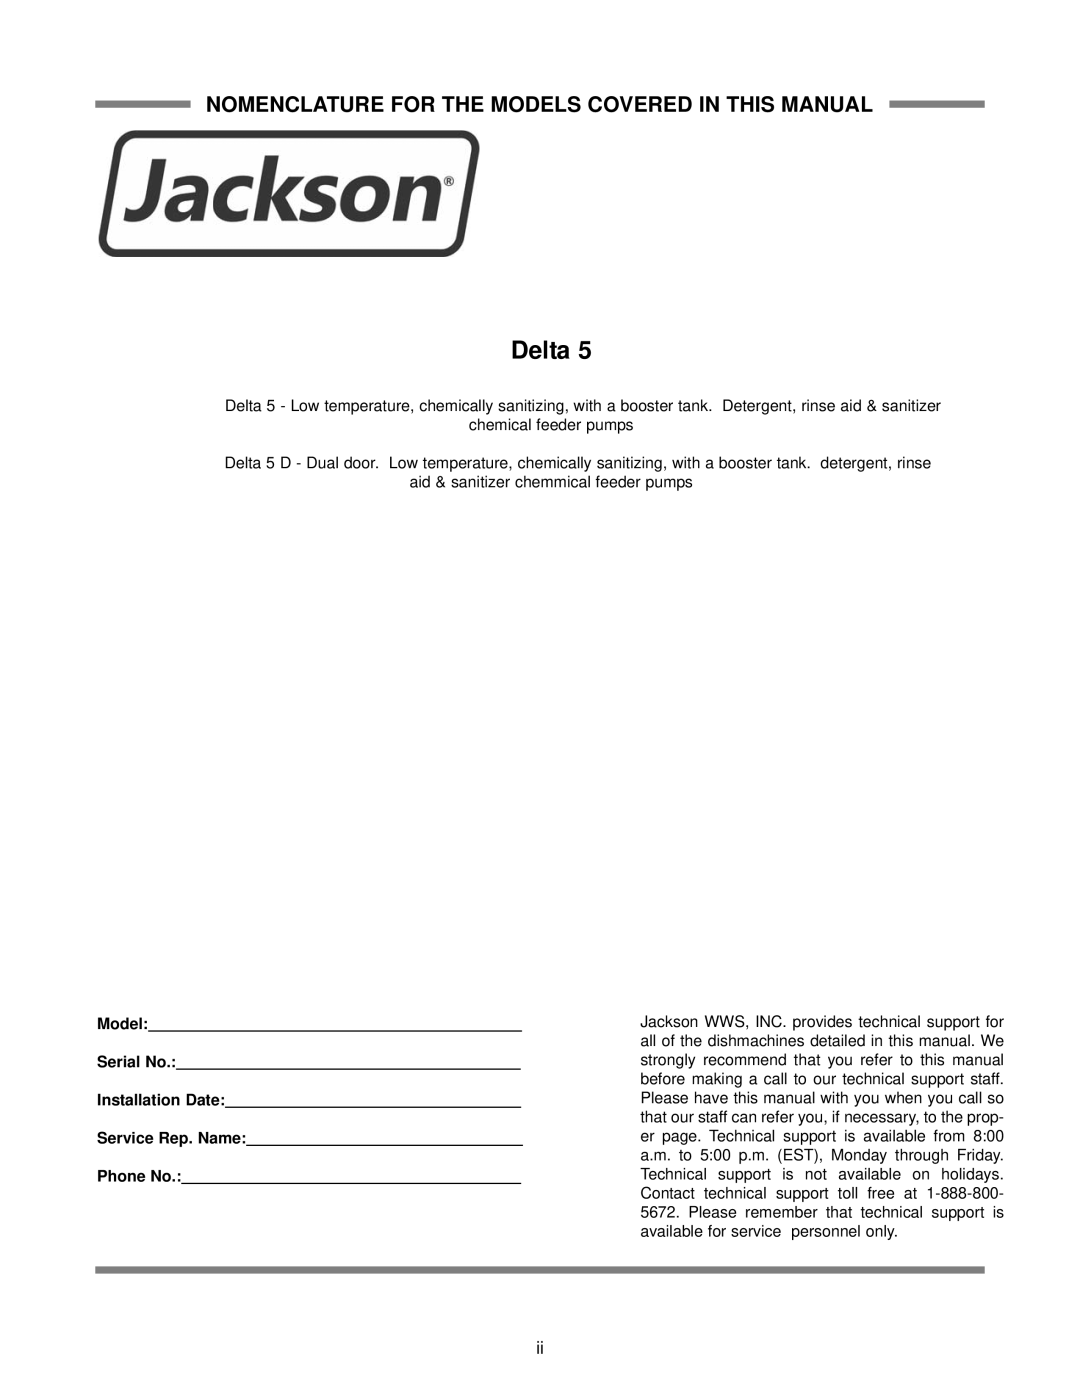 Jackson Chemical Sanitizing Dishmachine technical manual Nomenclature For The Models Covered In This Manual, Delta 